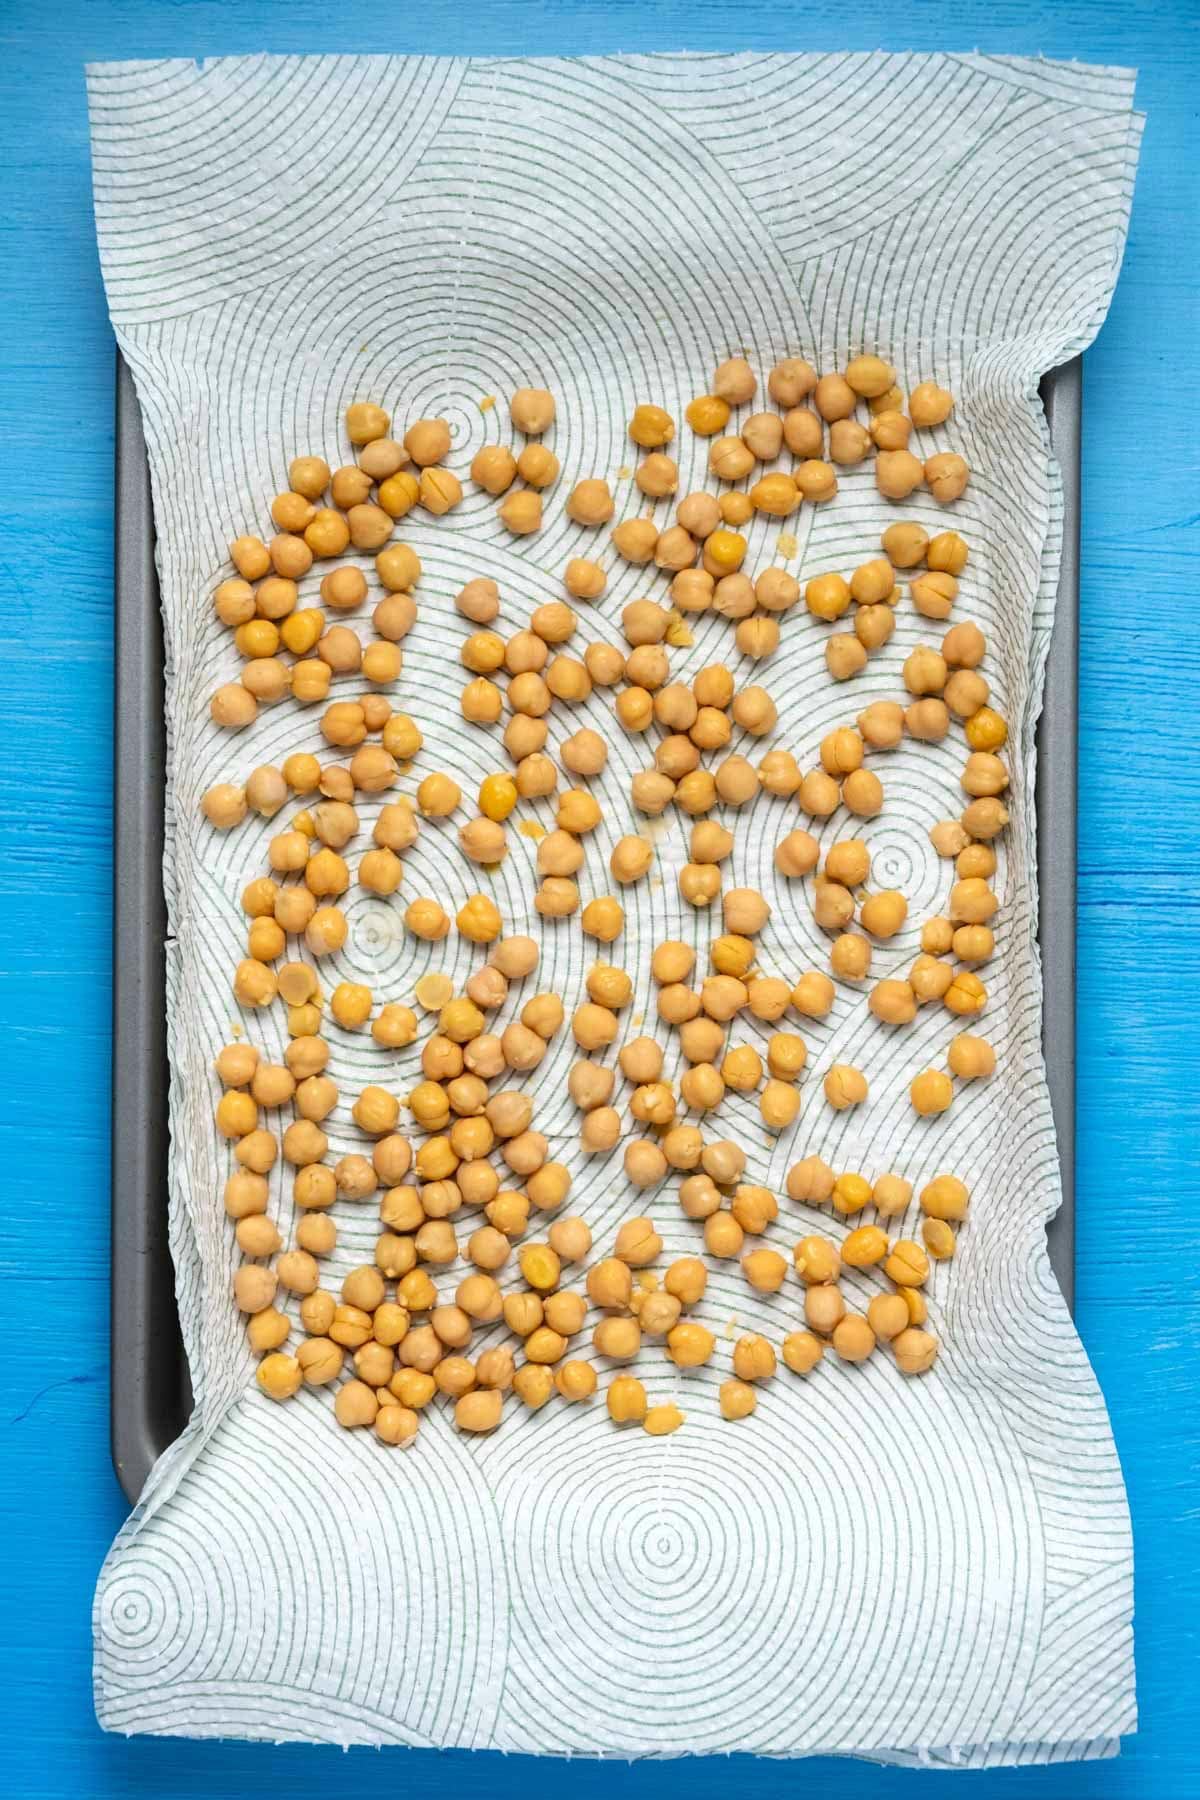 Chickpeas on a paper towel.